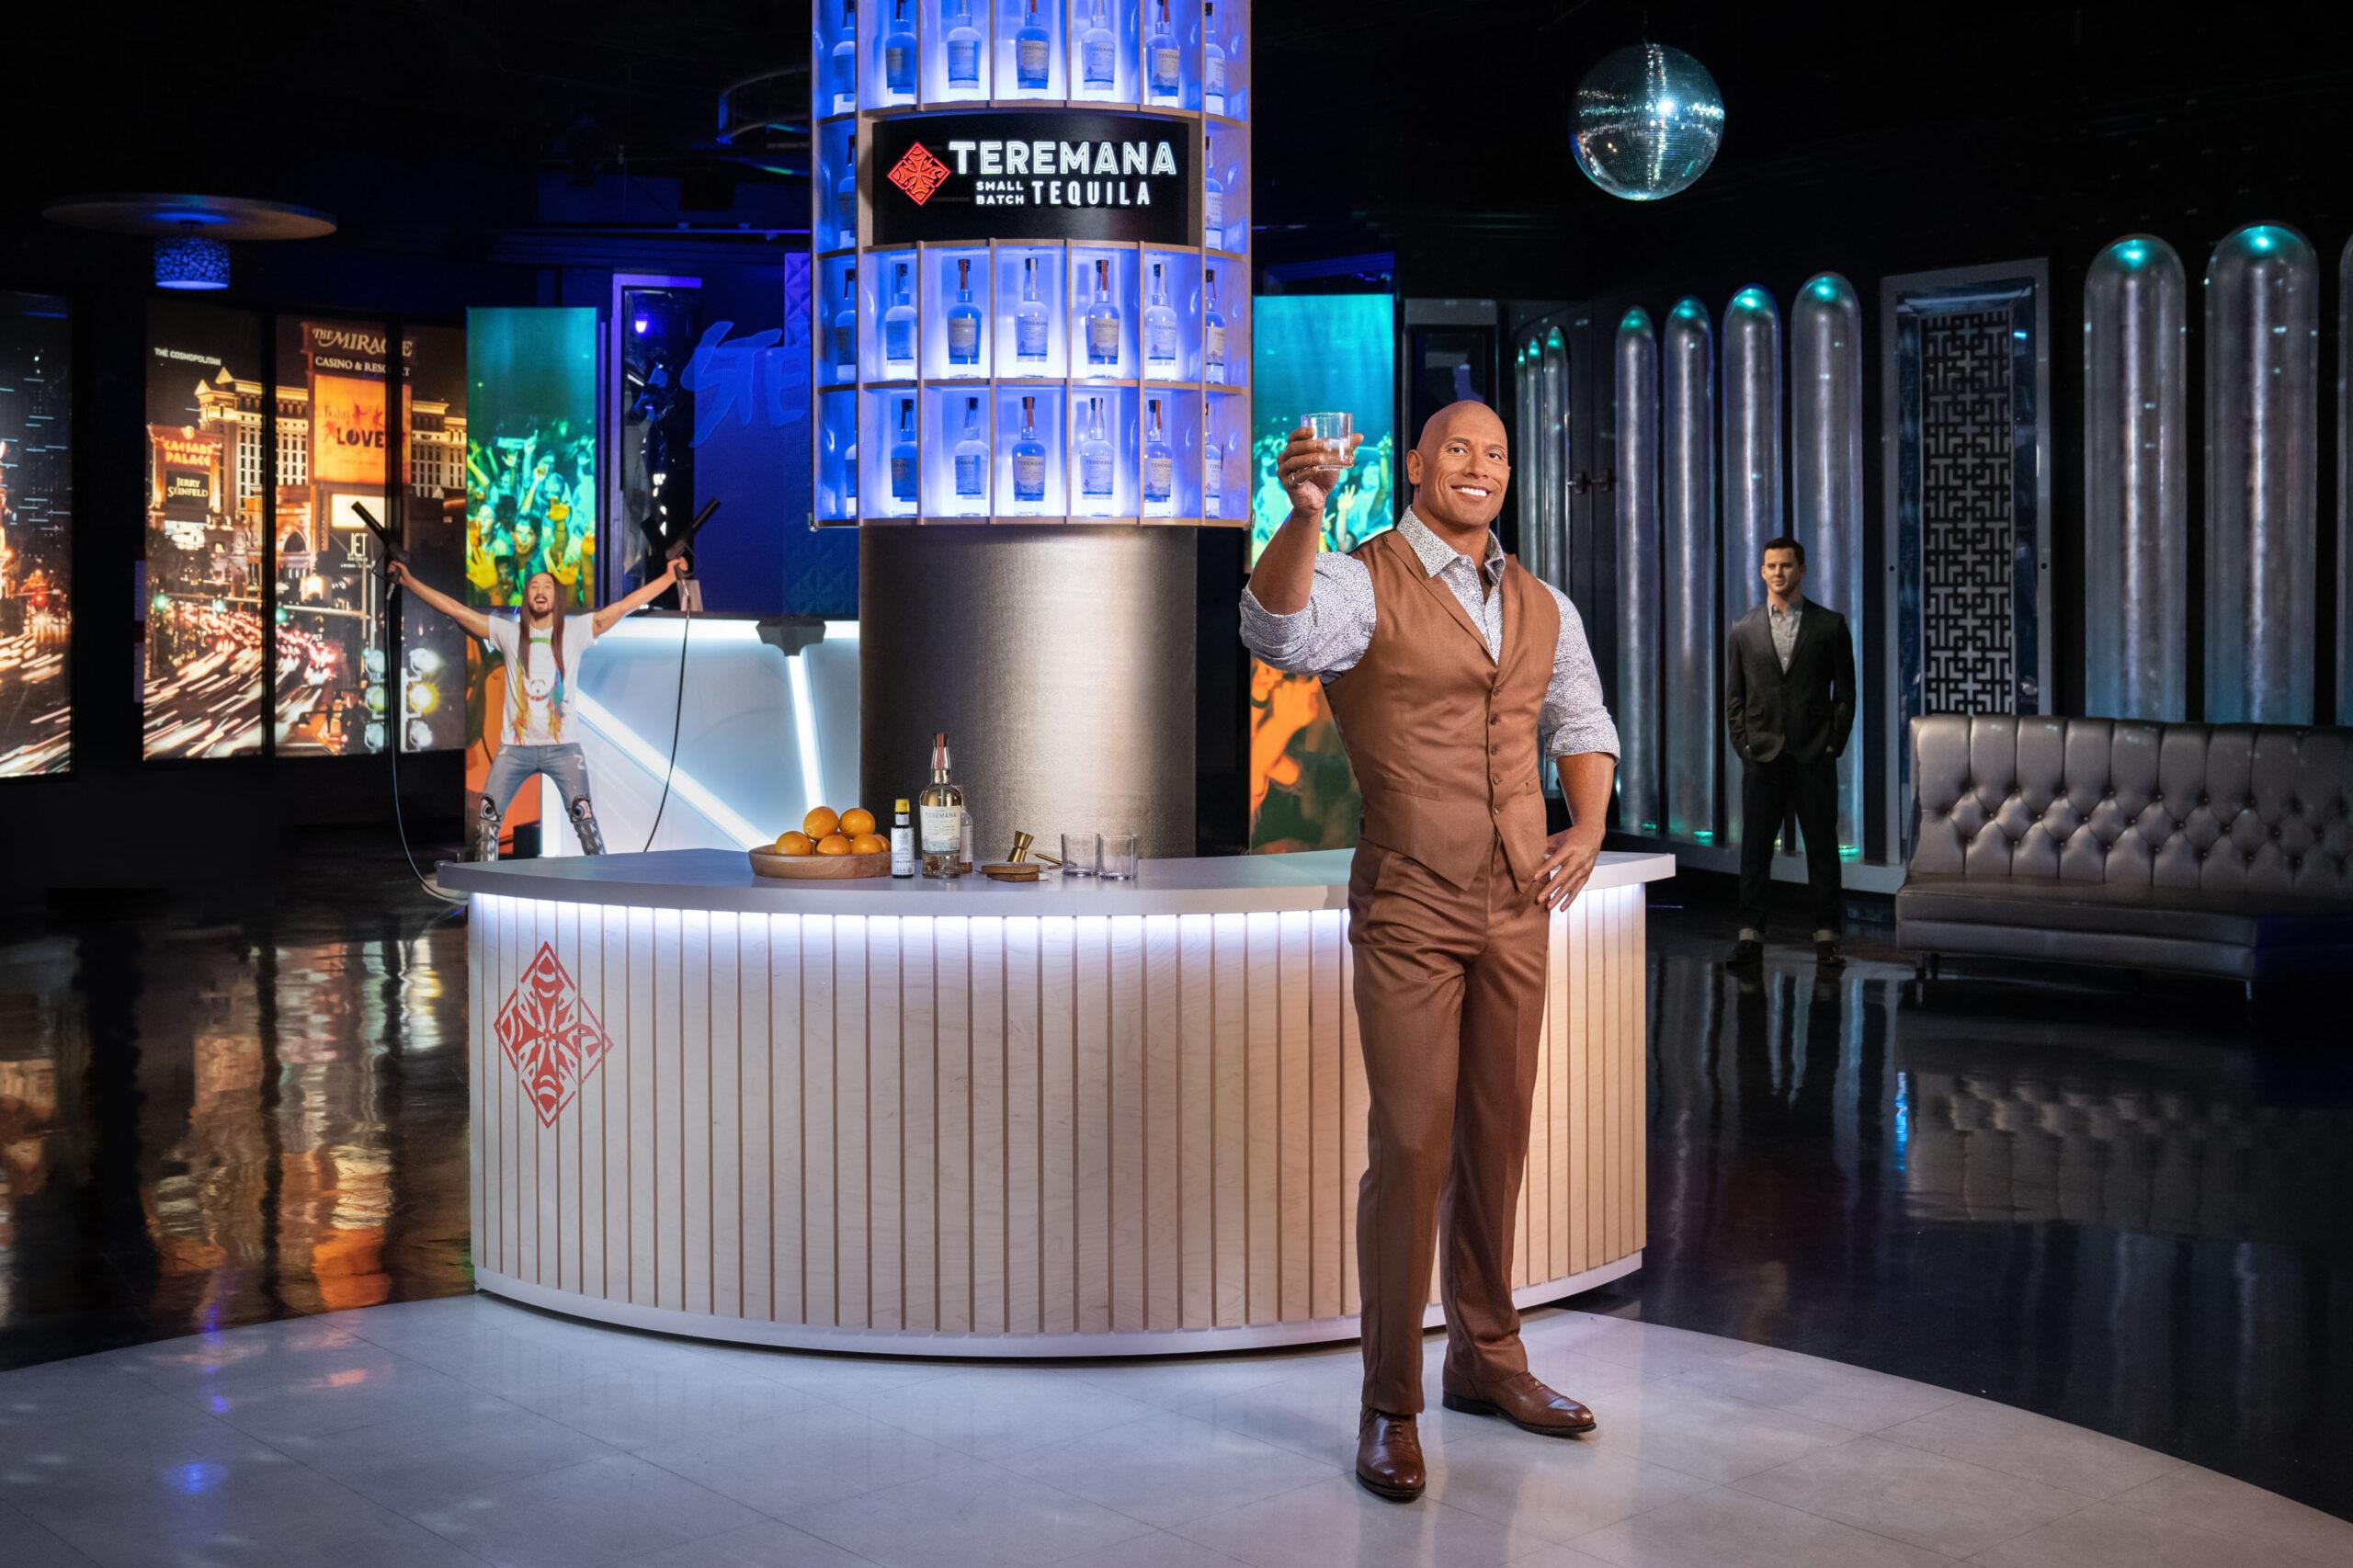 Dwayne The Rock Johnson has fans seeing quadruple as he gets four new Madame Tussauds wax figures